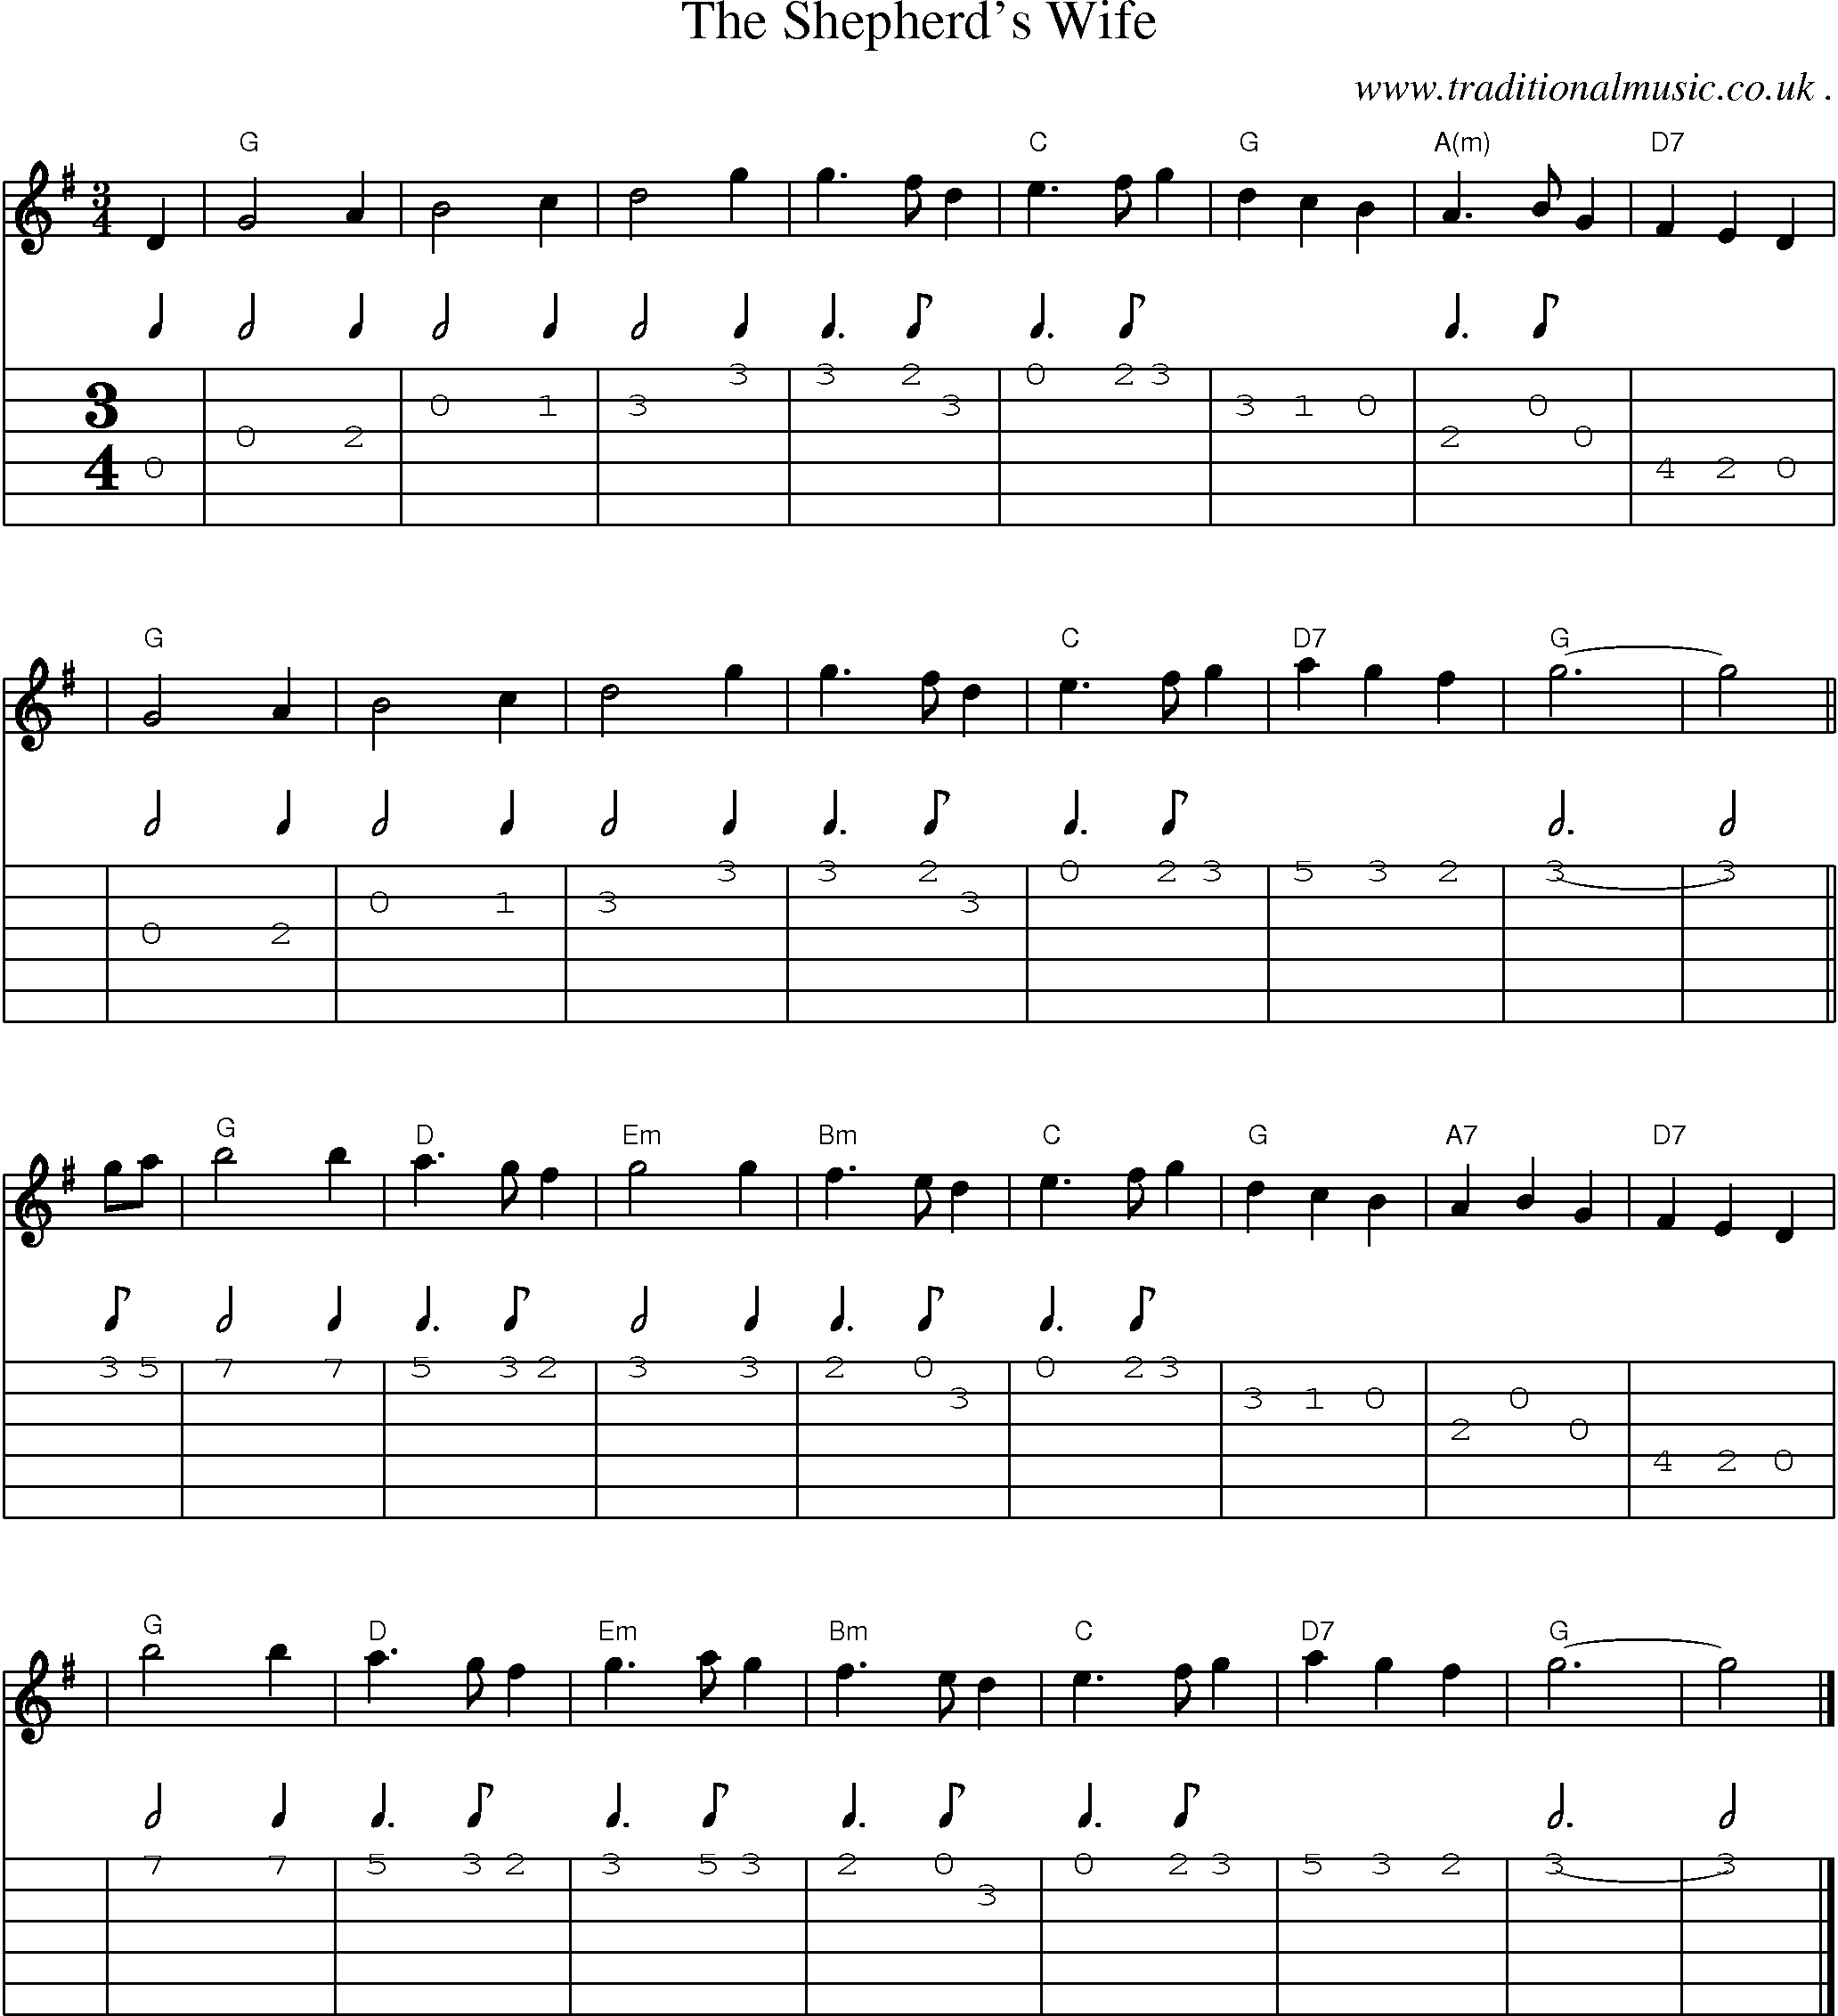 Sheet-music  score, Chords and Guitar Tabs for The Shepherds Wife